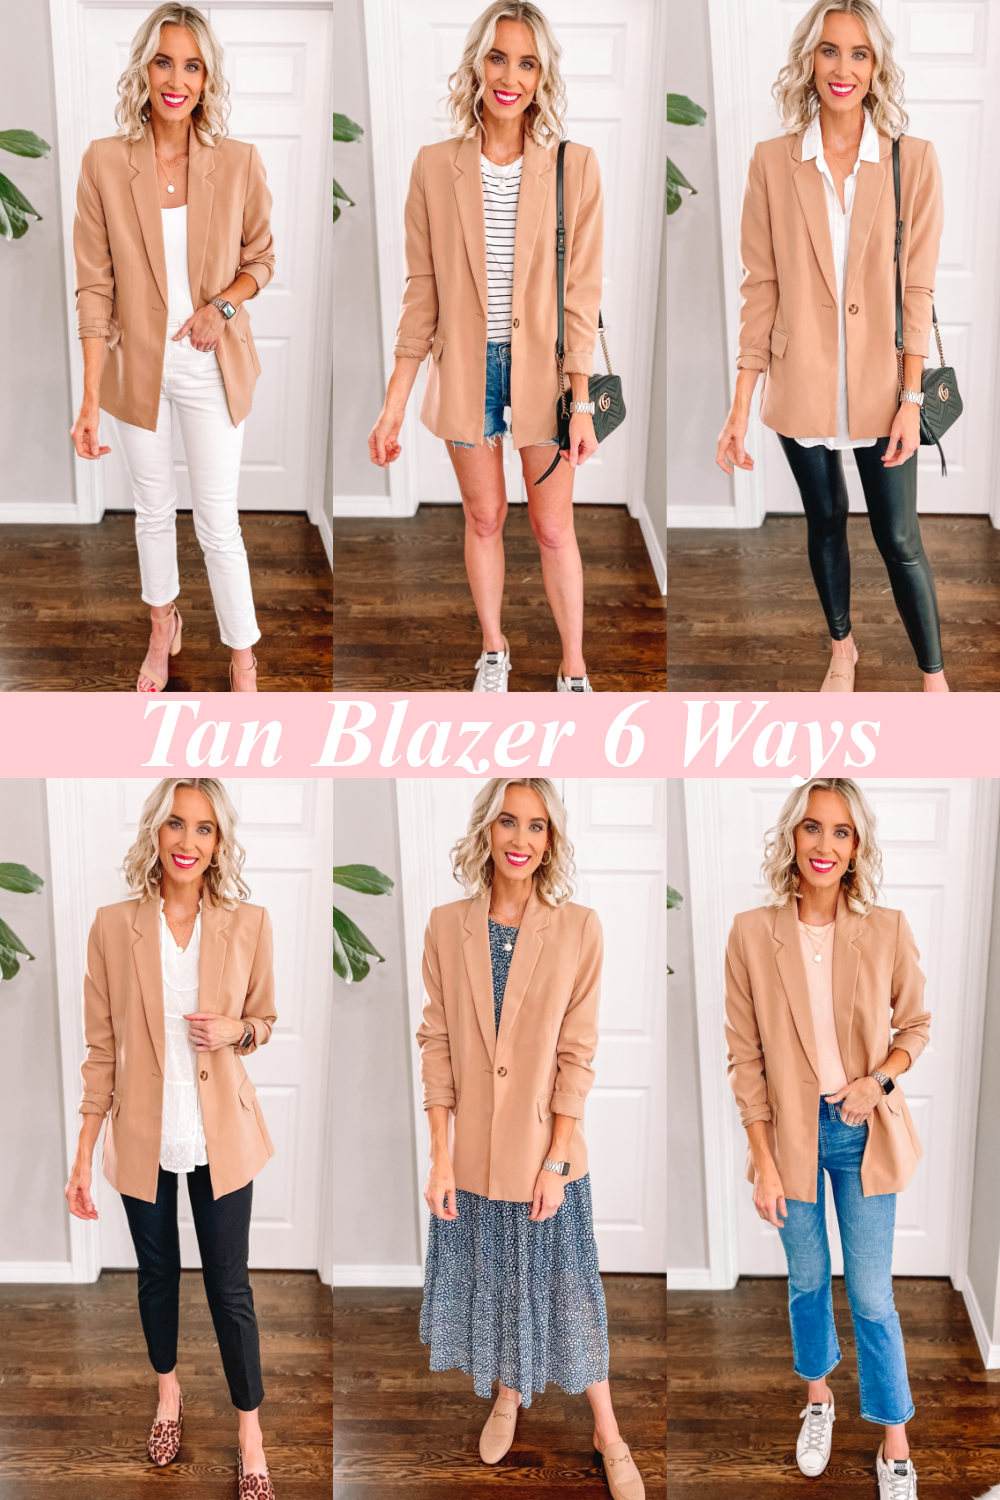 Beige Blazer with Leggings Casual Fall Outfits (2 ideas & outfits)